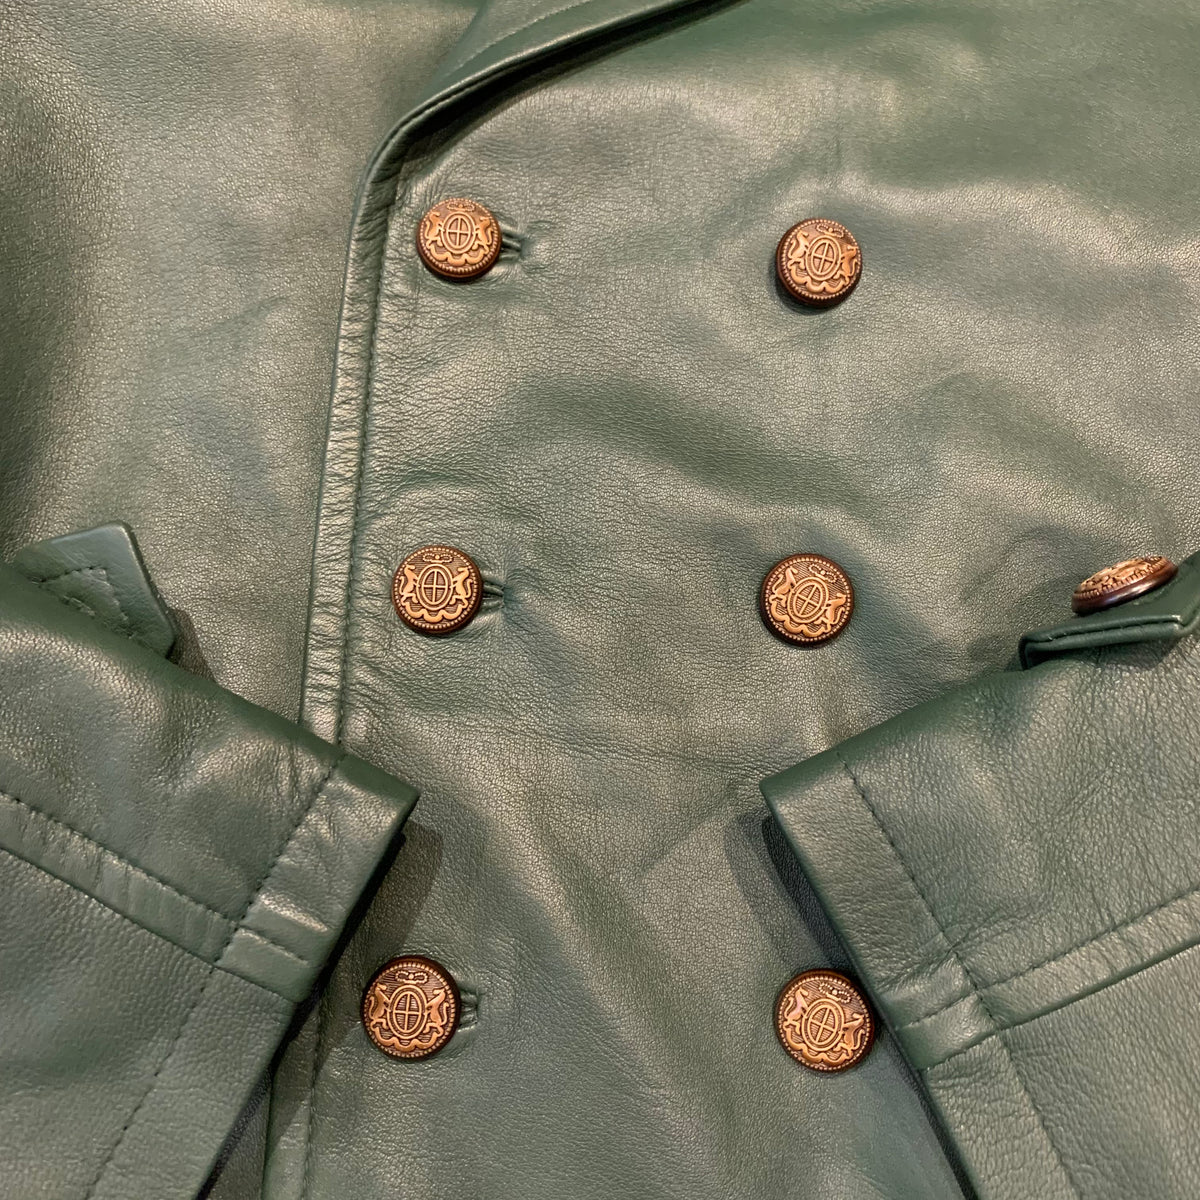 Jakewood Forest Green Lambskin Trench Coat - Dudes Boutique